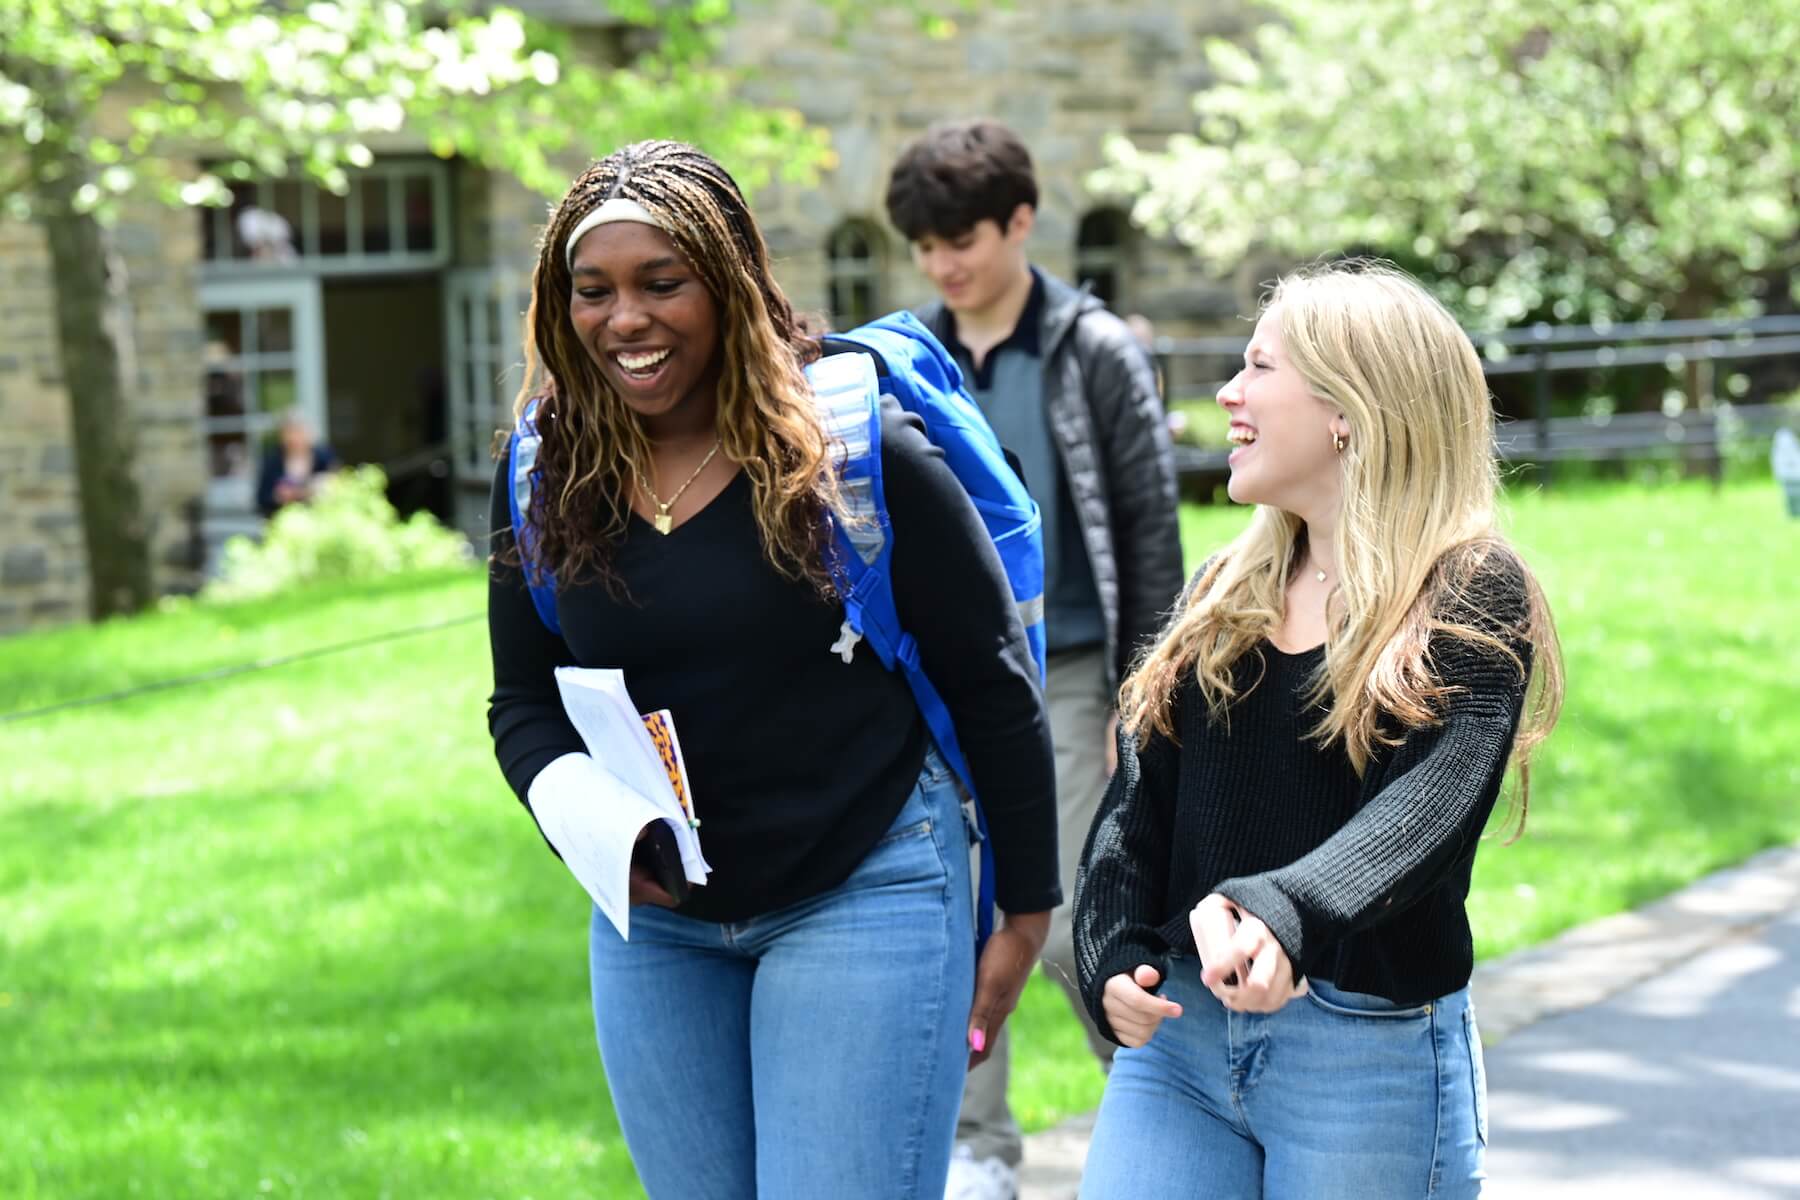 Ethical Culture Fieldston School Fieldston Upper students walk through the quad talking to each other during the College Symposium